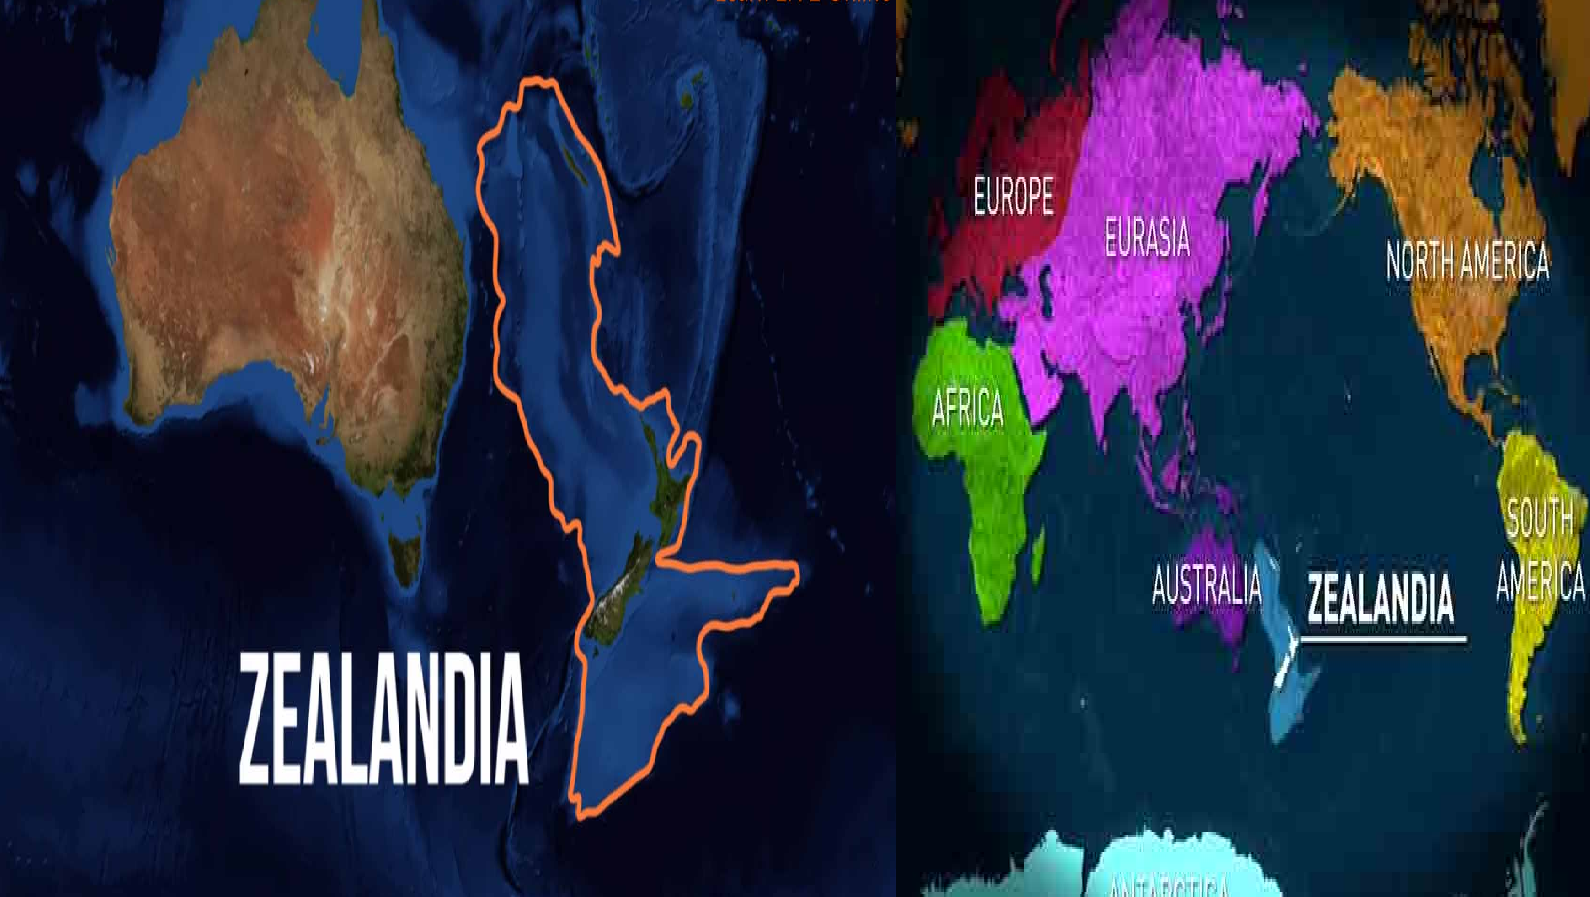 Zealandia Continent: The world's eighth Continent revealed – Discover the enigmatic Zealandia.